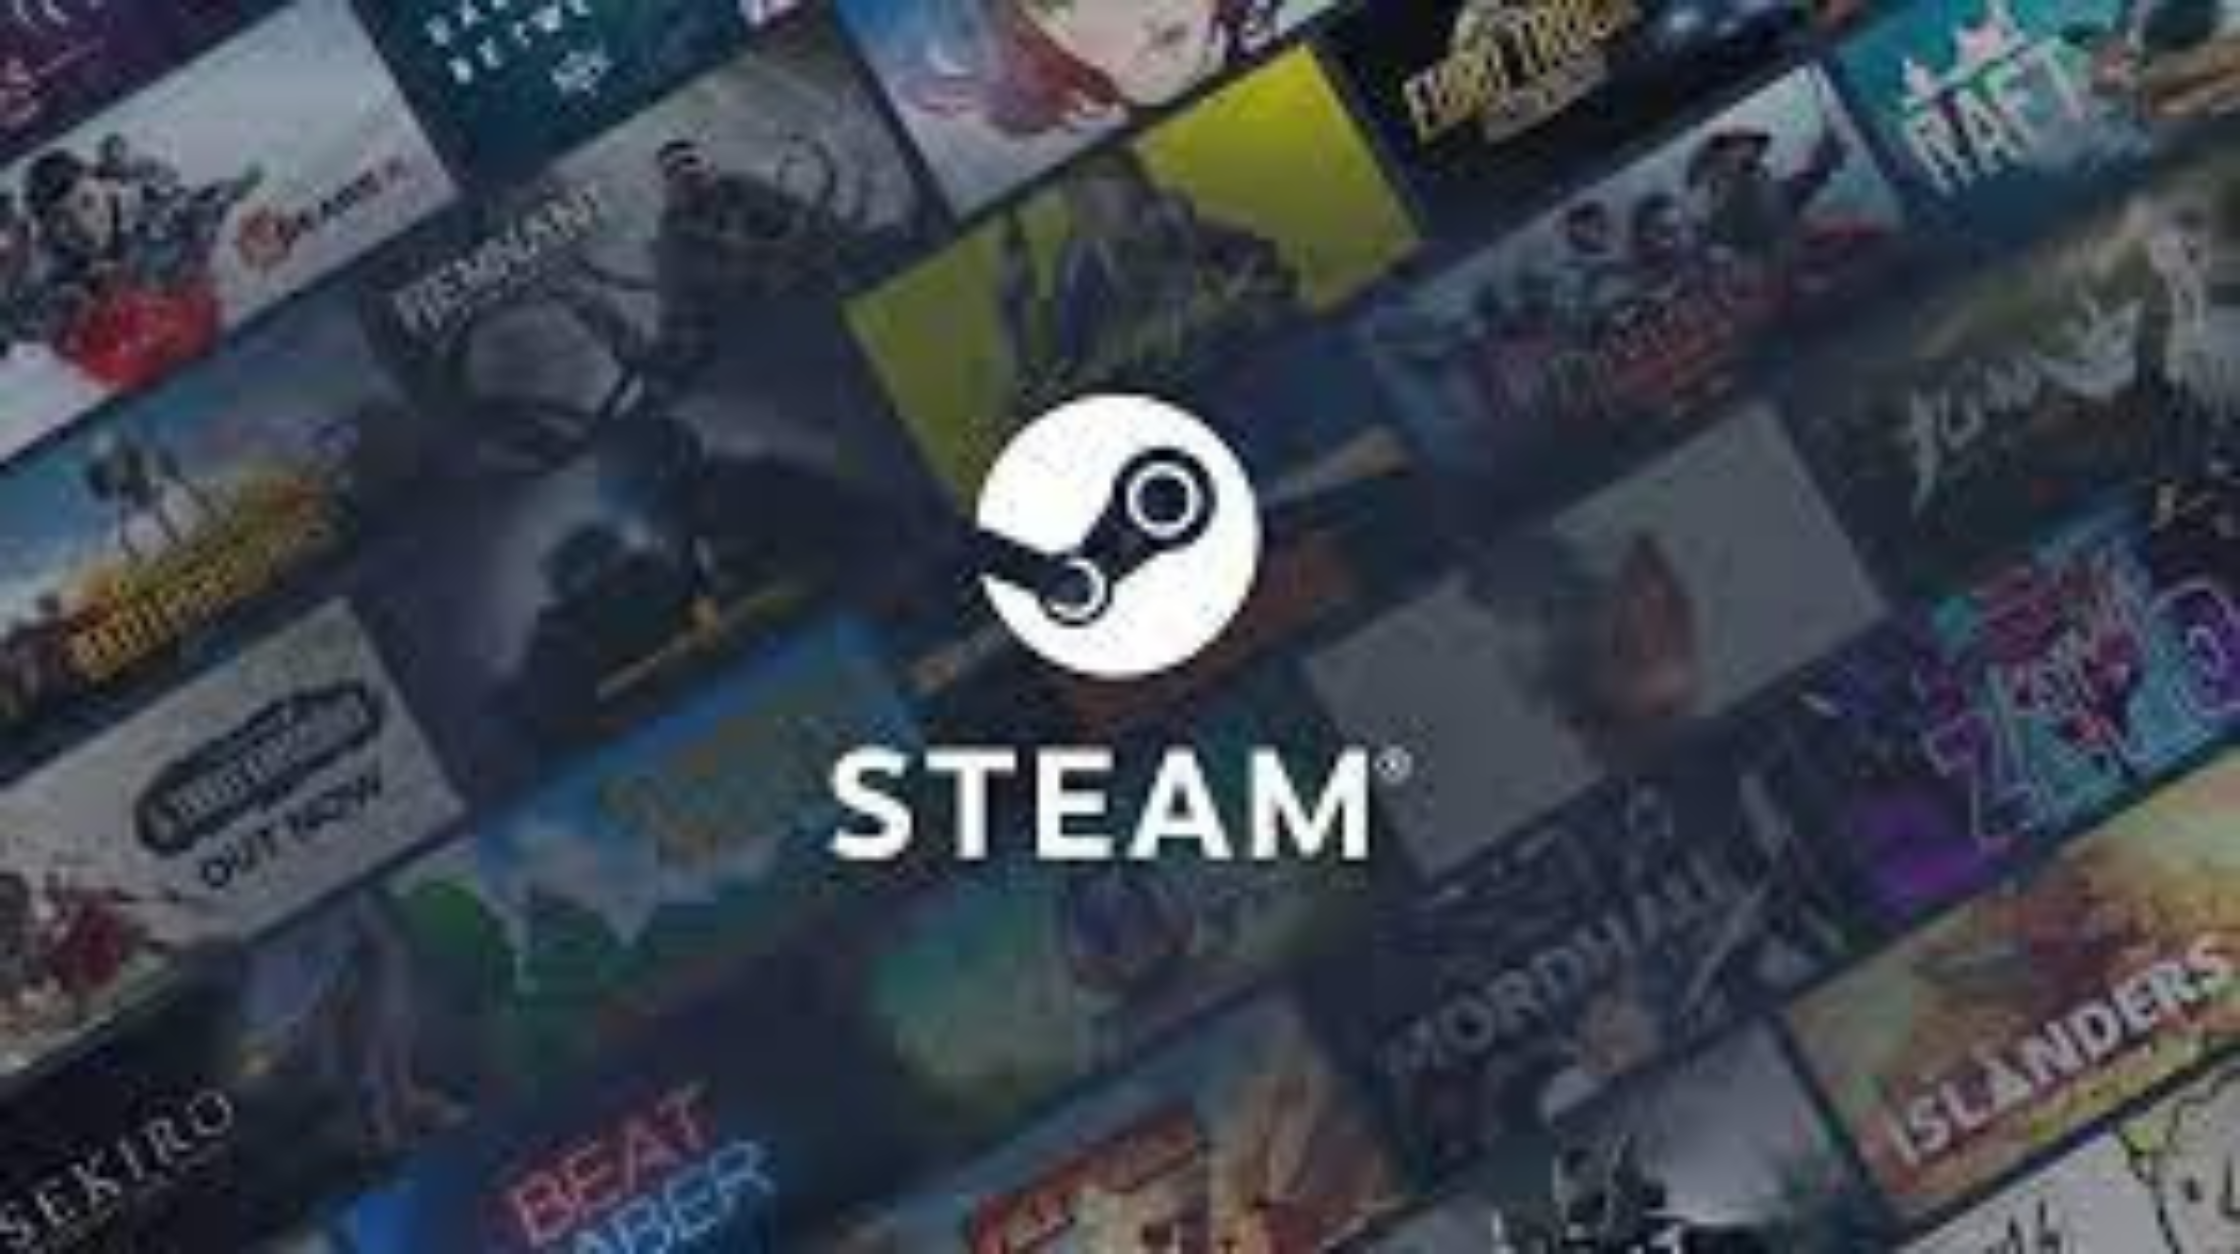 Valve's Ban On AI Art In Steam Games Sparks Controversy